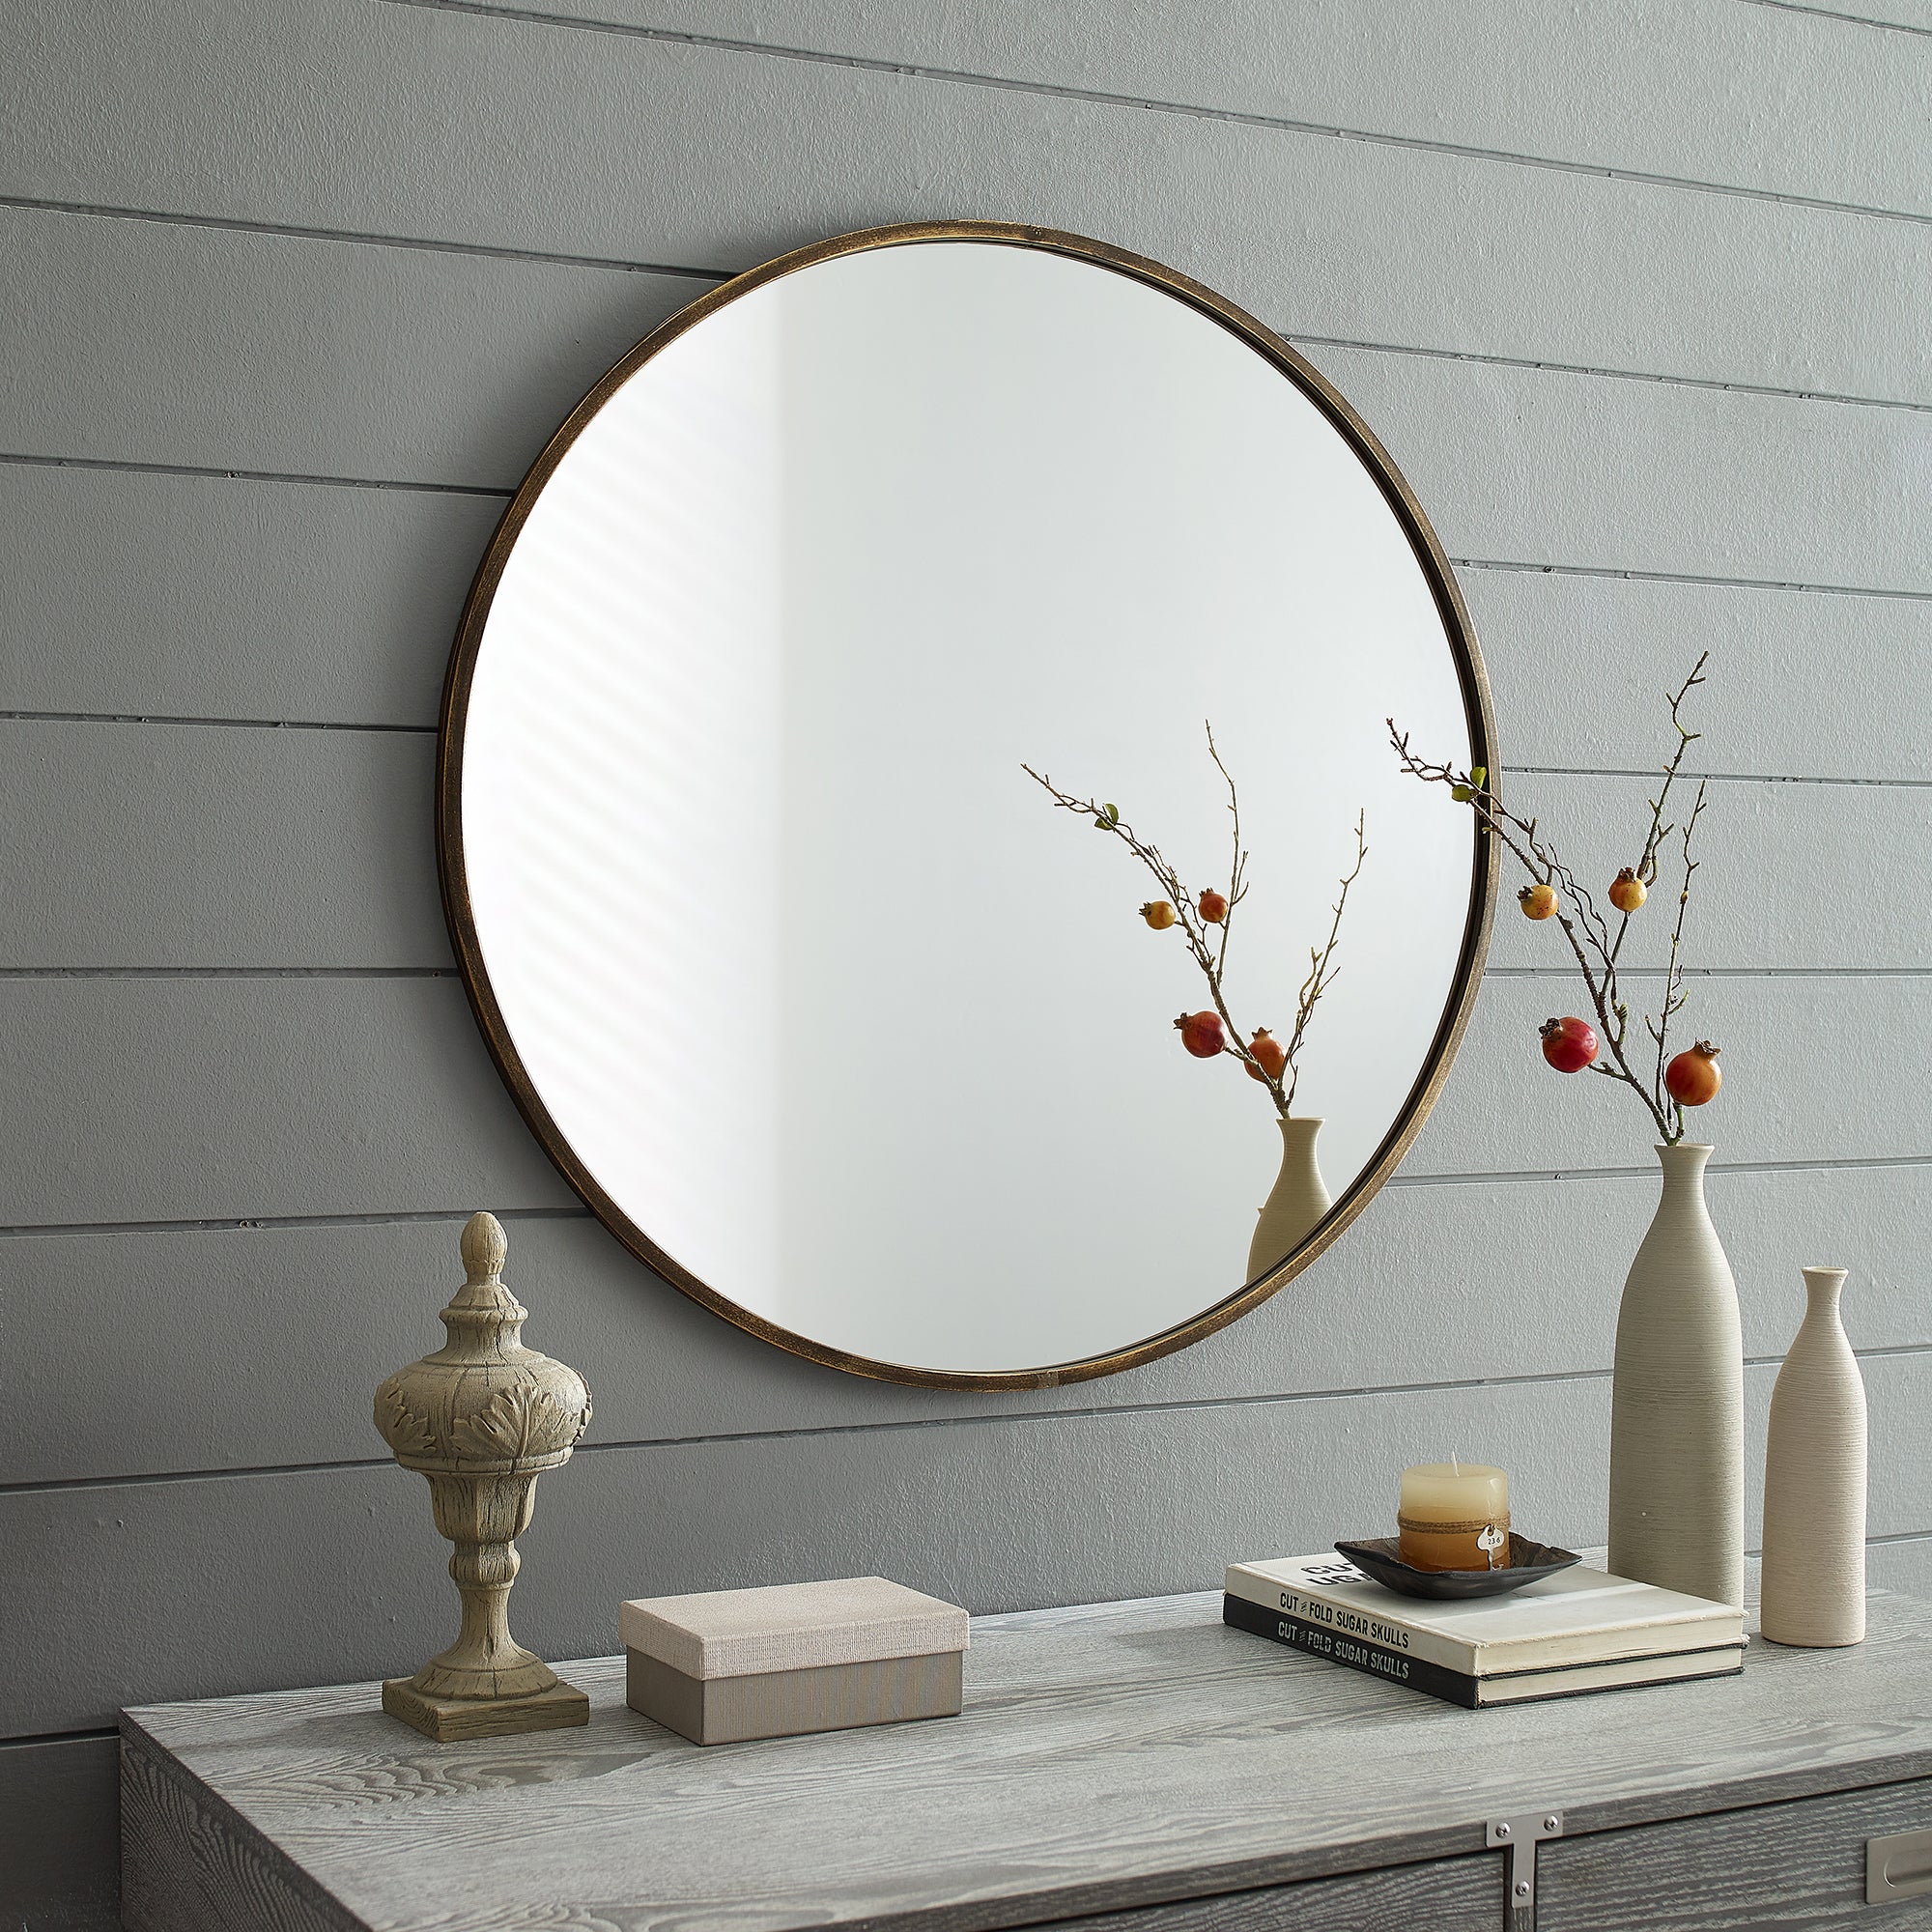 32" Round Metal Framed Mirror - Antique Brass - East Shore Modern Home Furnishings